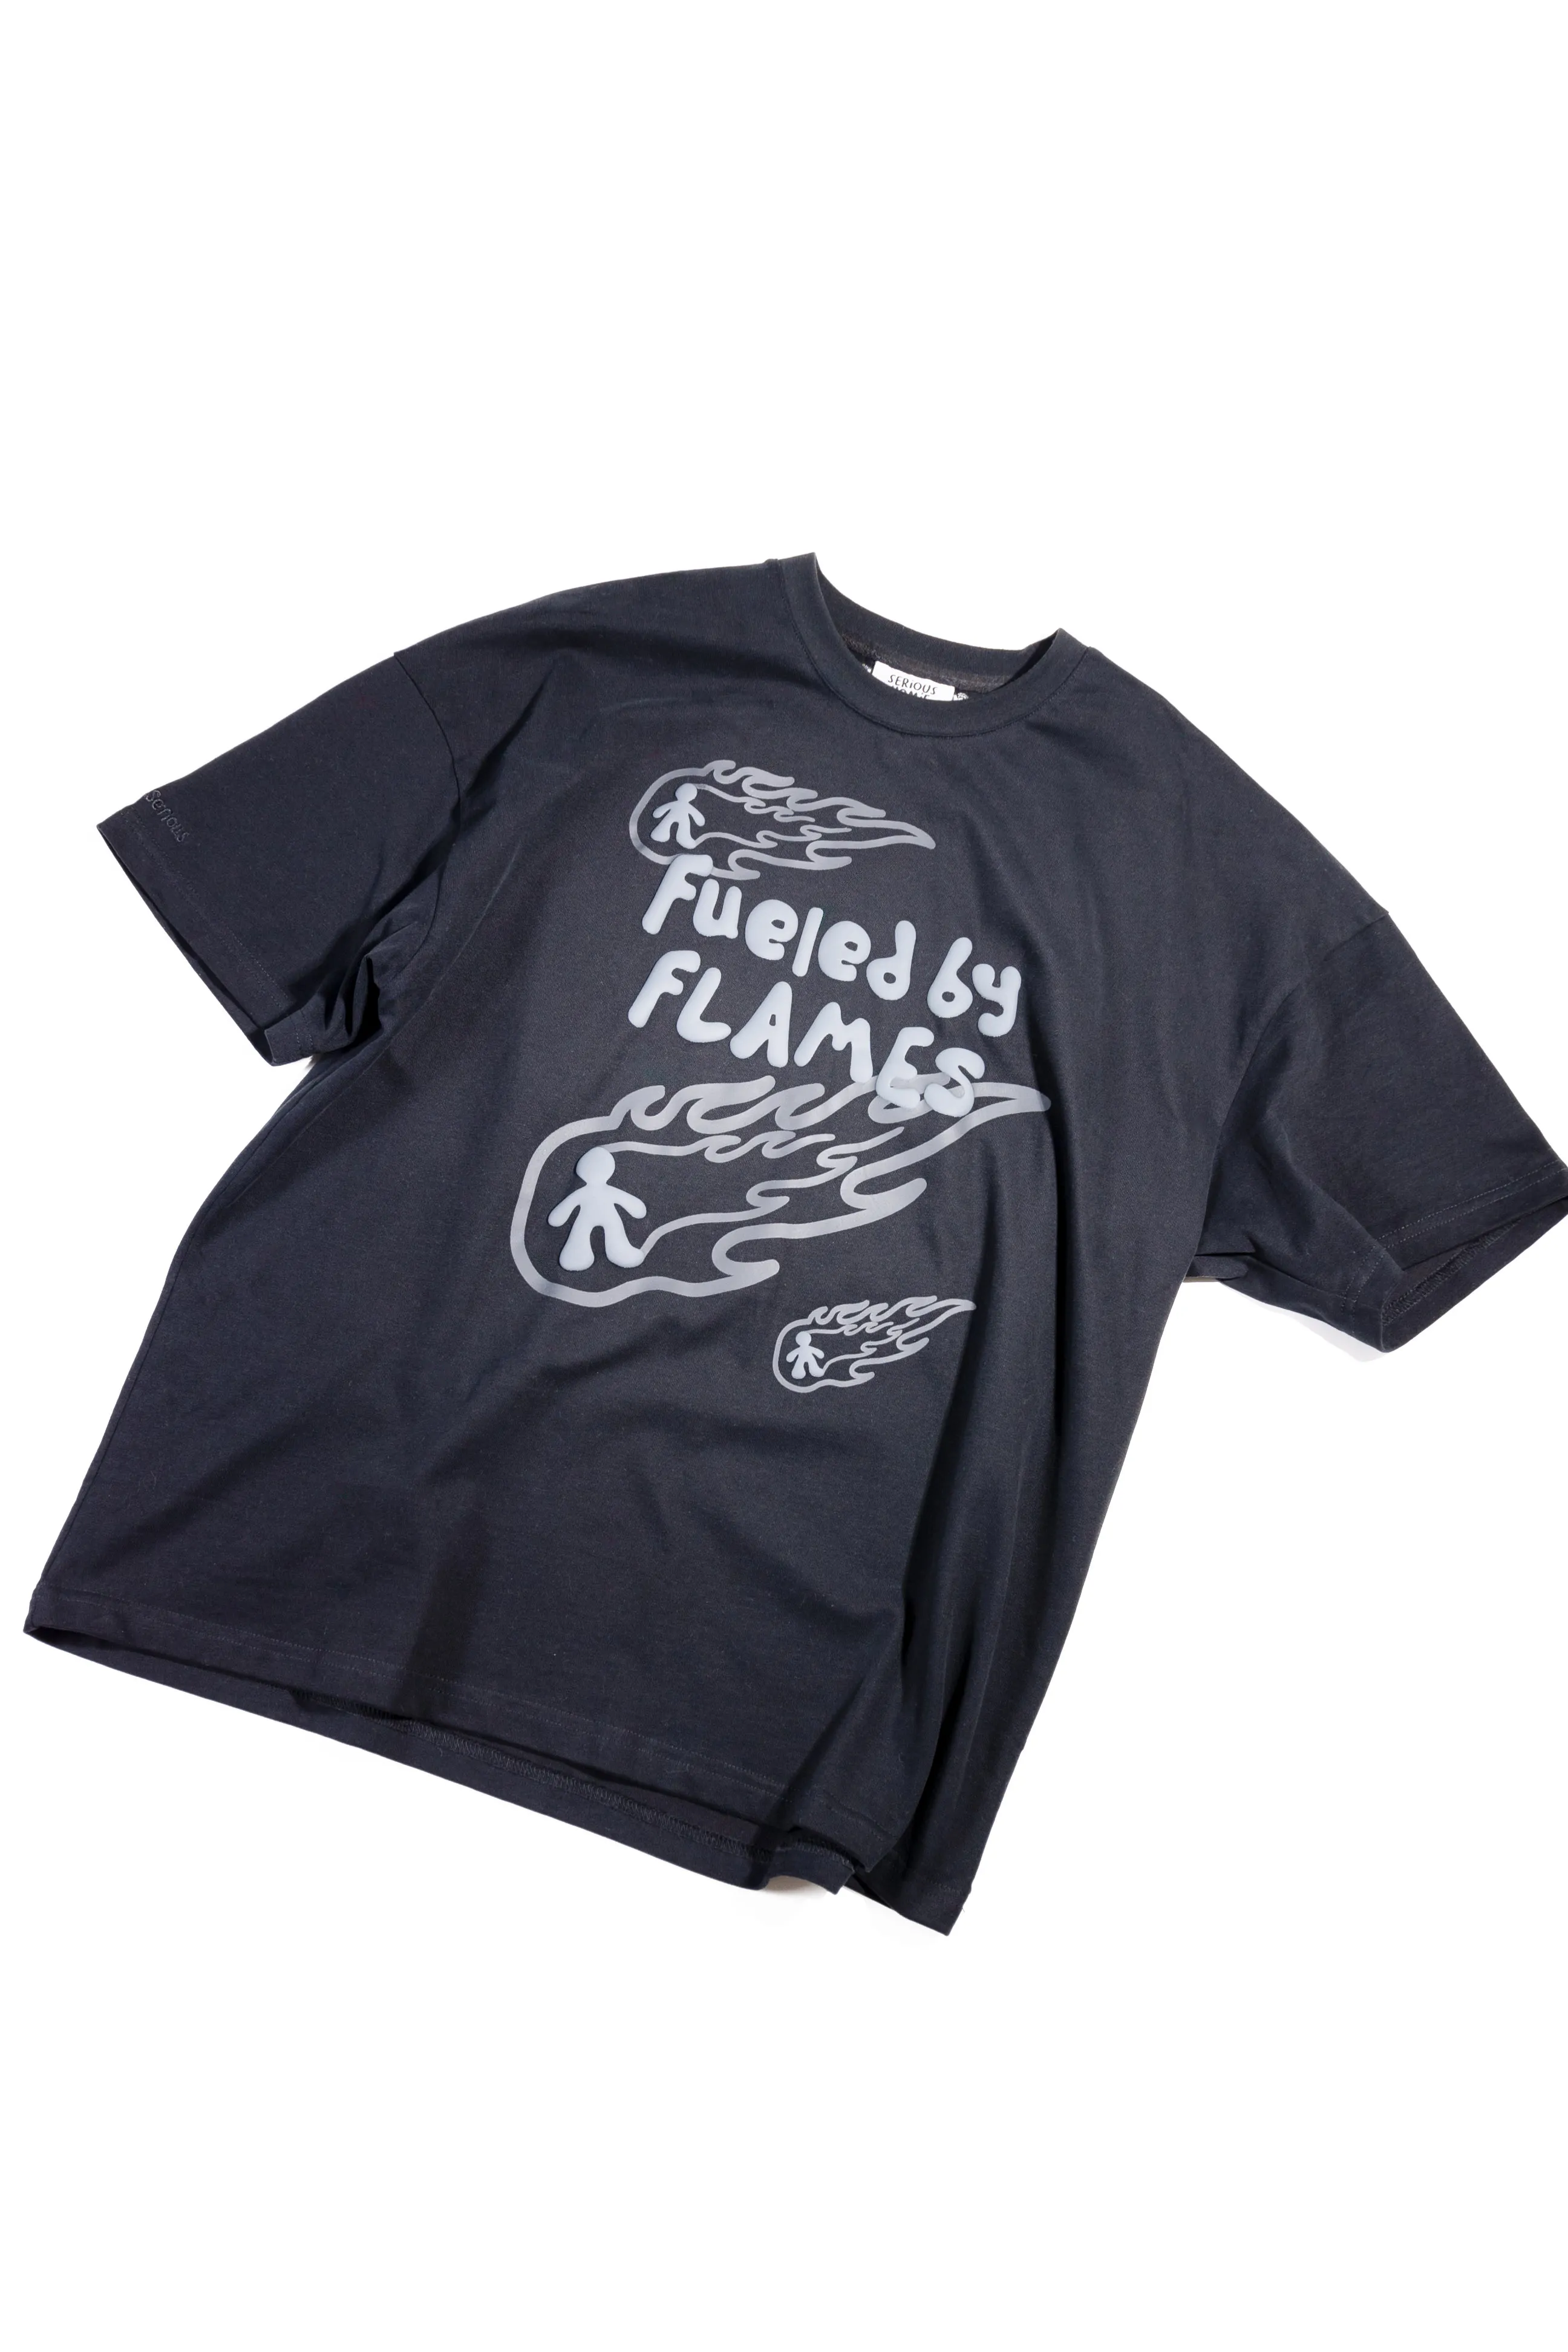 Fueled by Flames Tee (Noir)